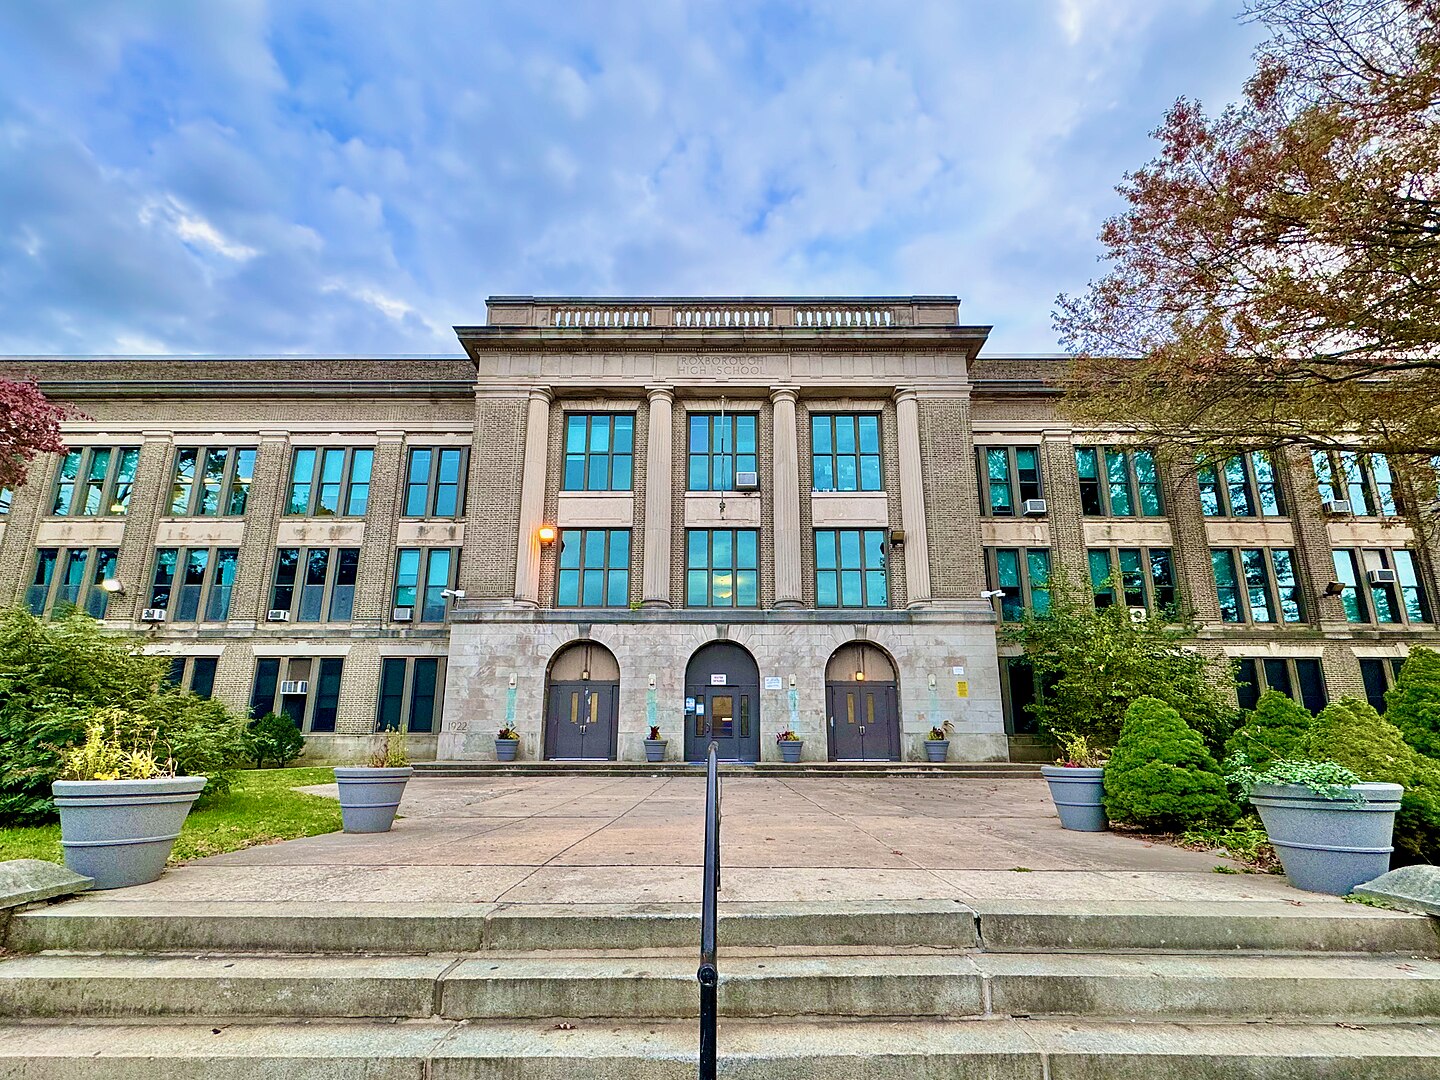 Tax Cuts cost schools: Three-story, large, traditional, light gray and tan block building with steps up to 3 double doors entrances